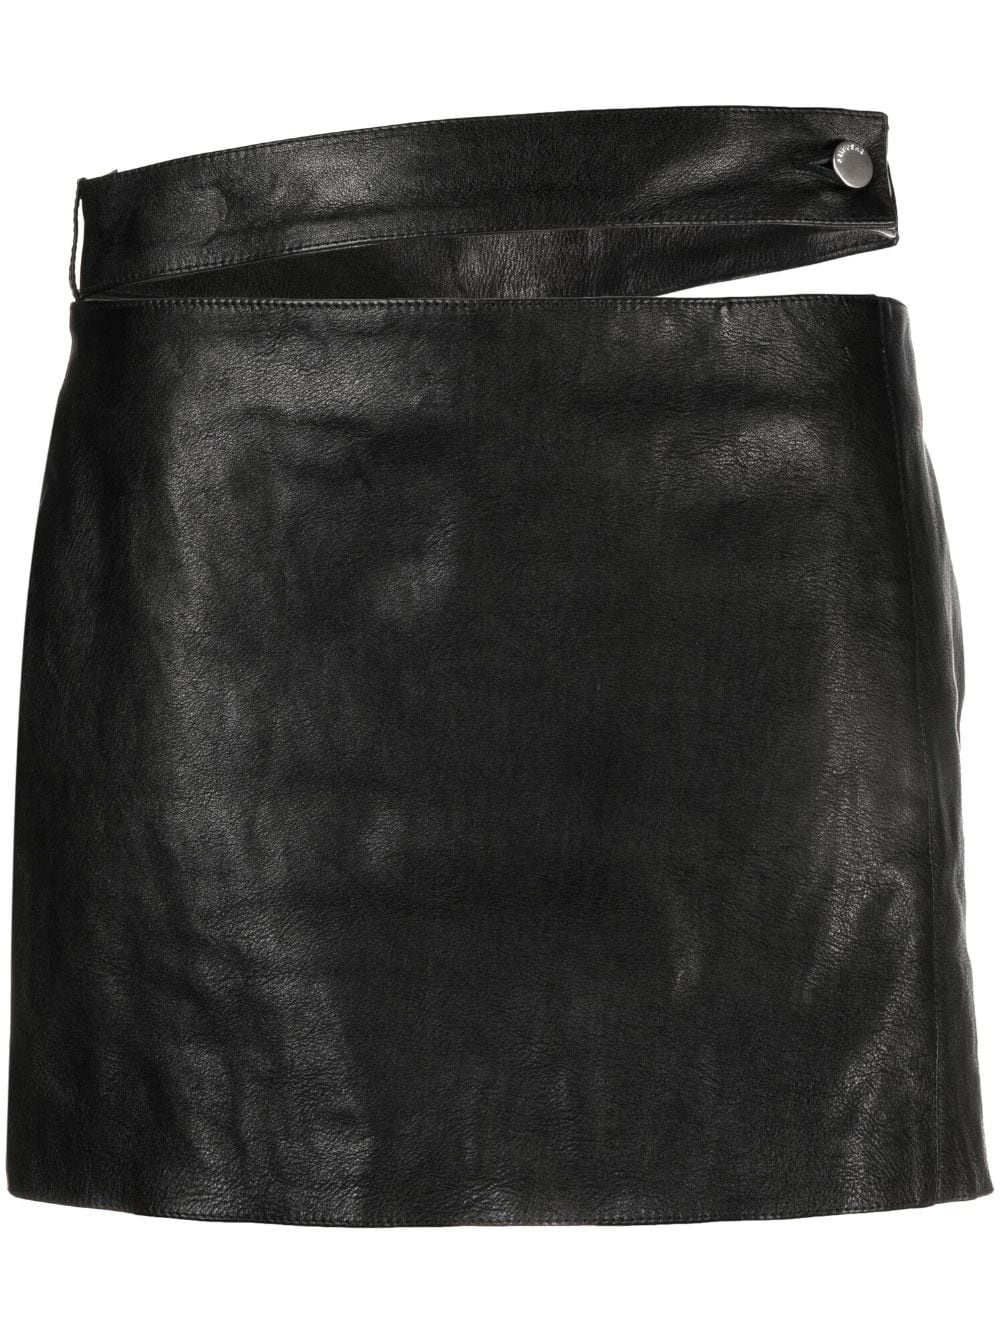 low-rise leather miniskirt - 1